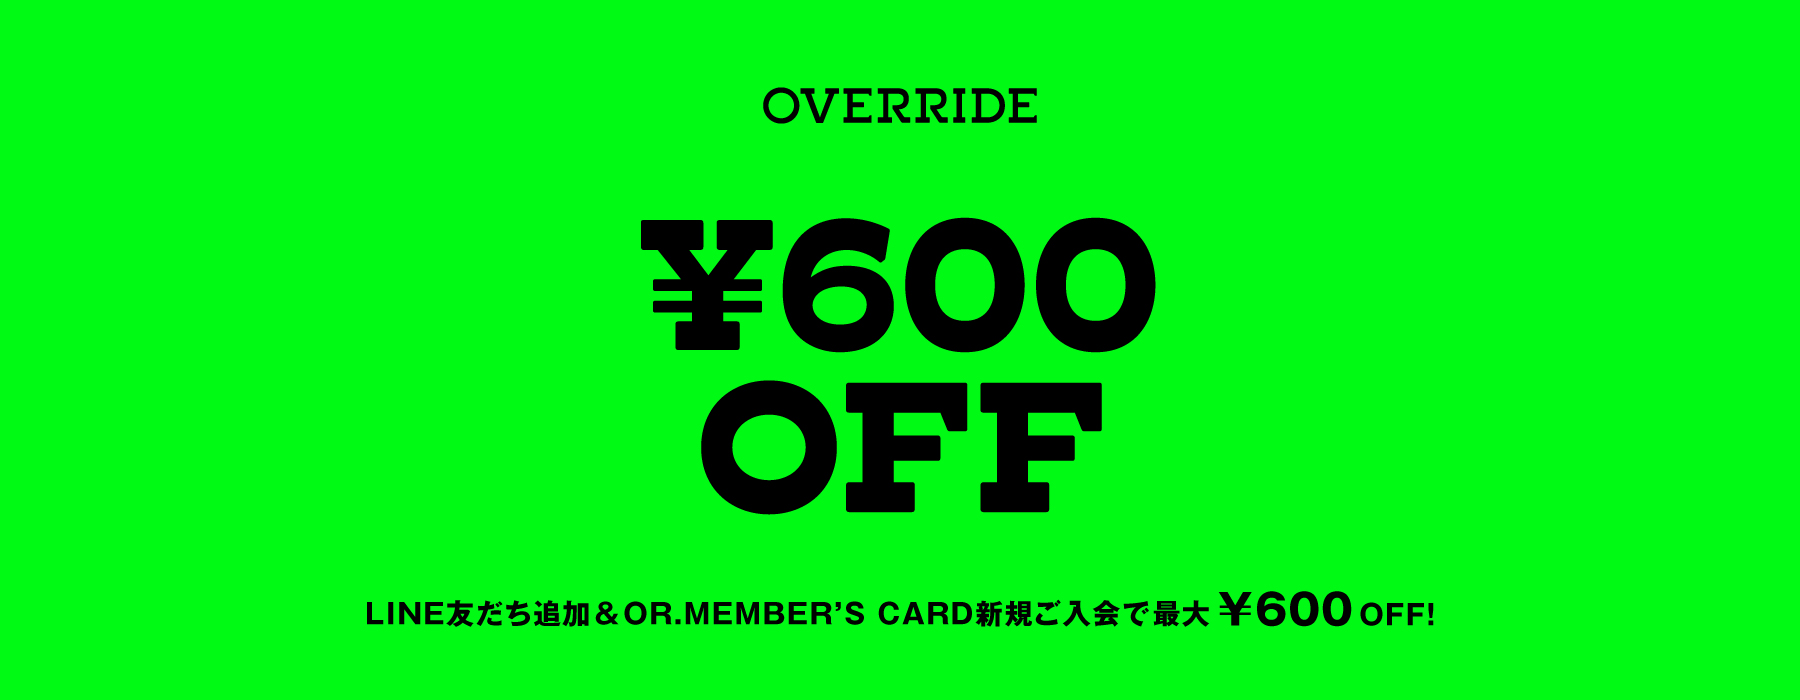 LINE友だち追加とOR.MEMBER’S CARD新規会員登録で最大600円OFF！